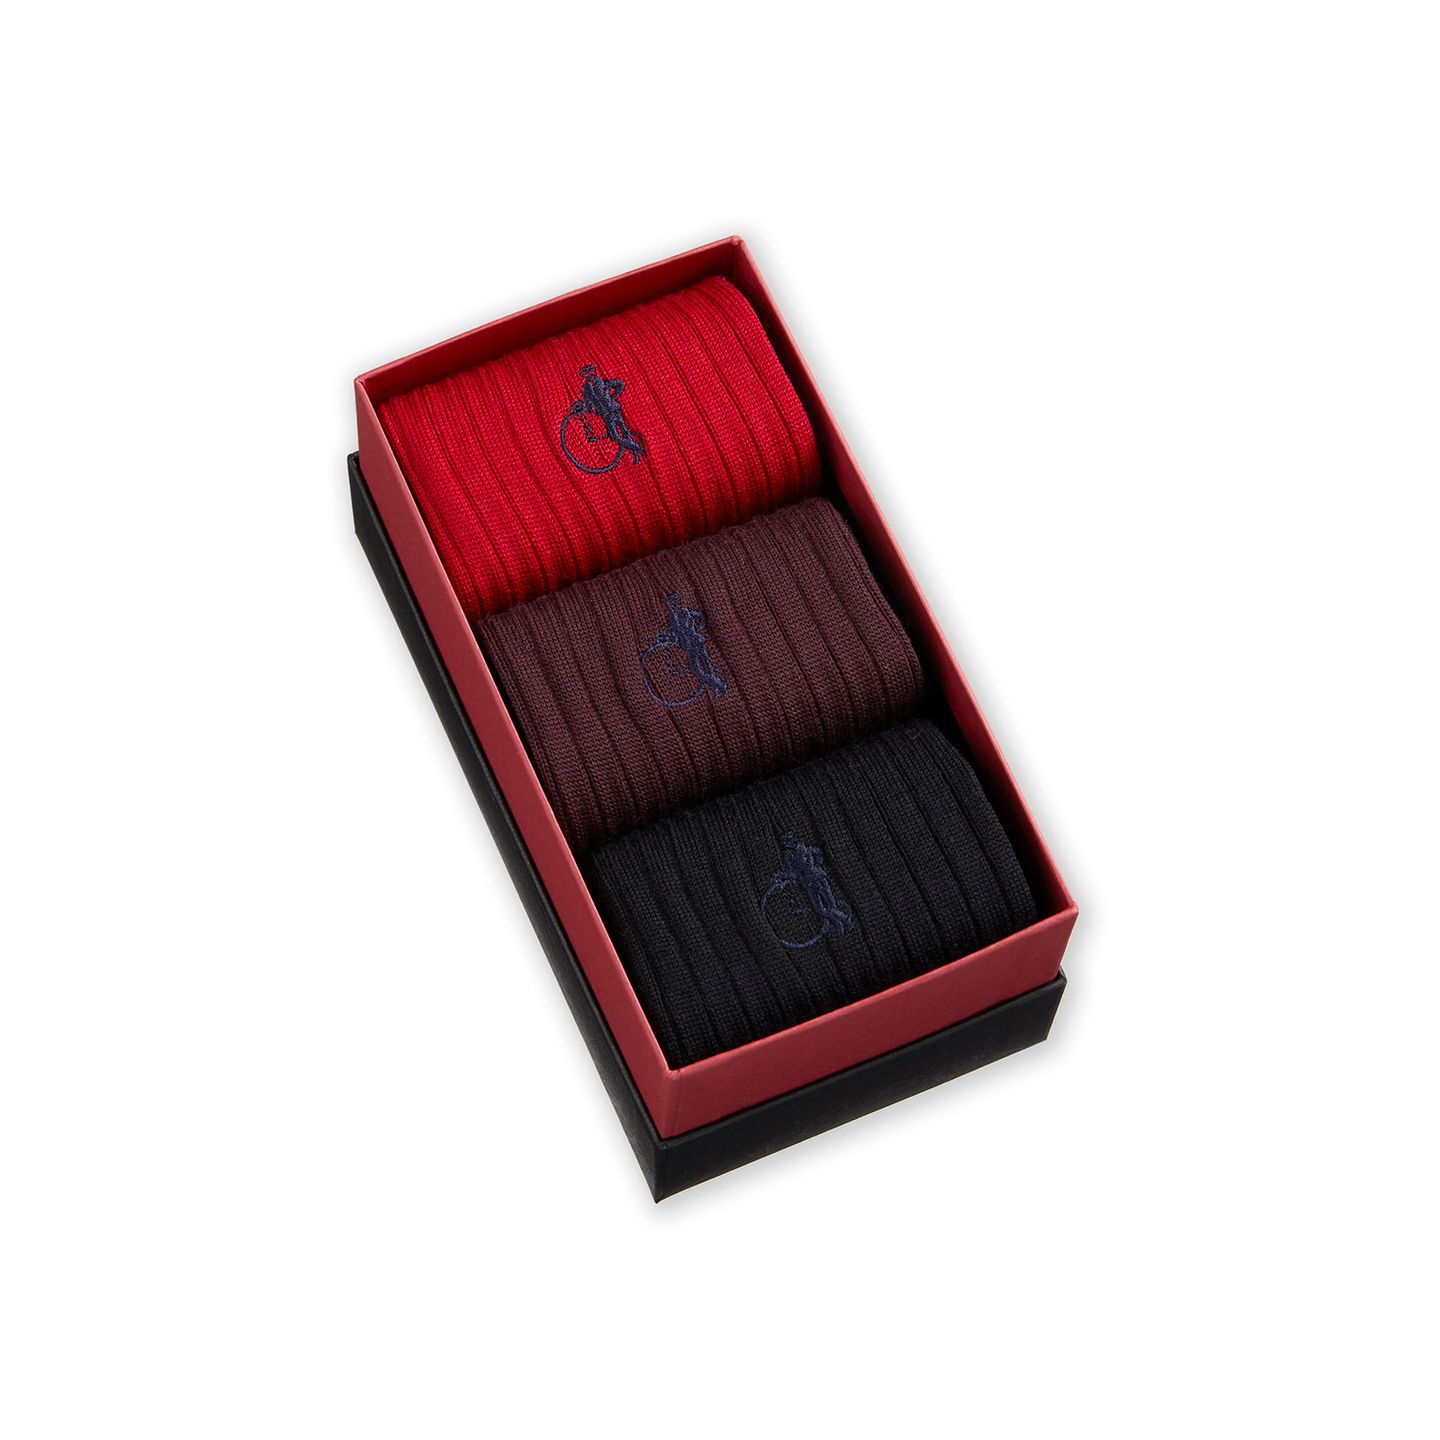 Trio of red, brown and black socks in a box